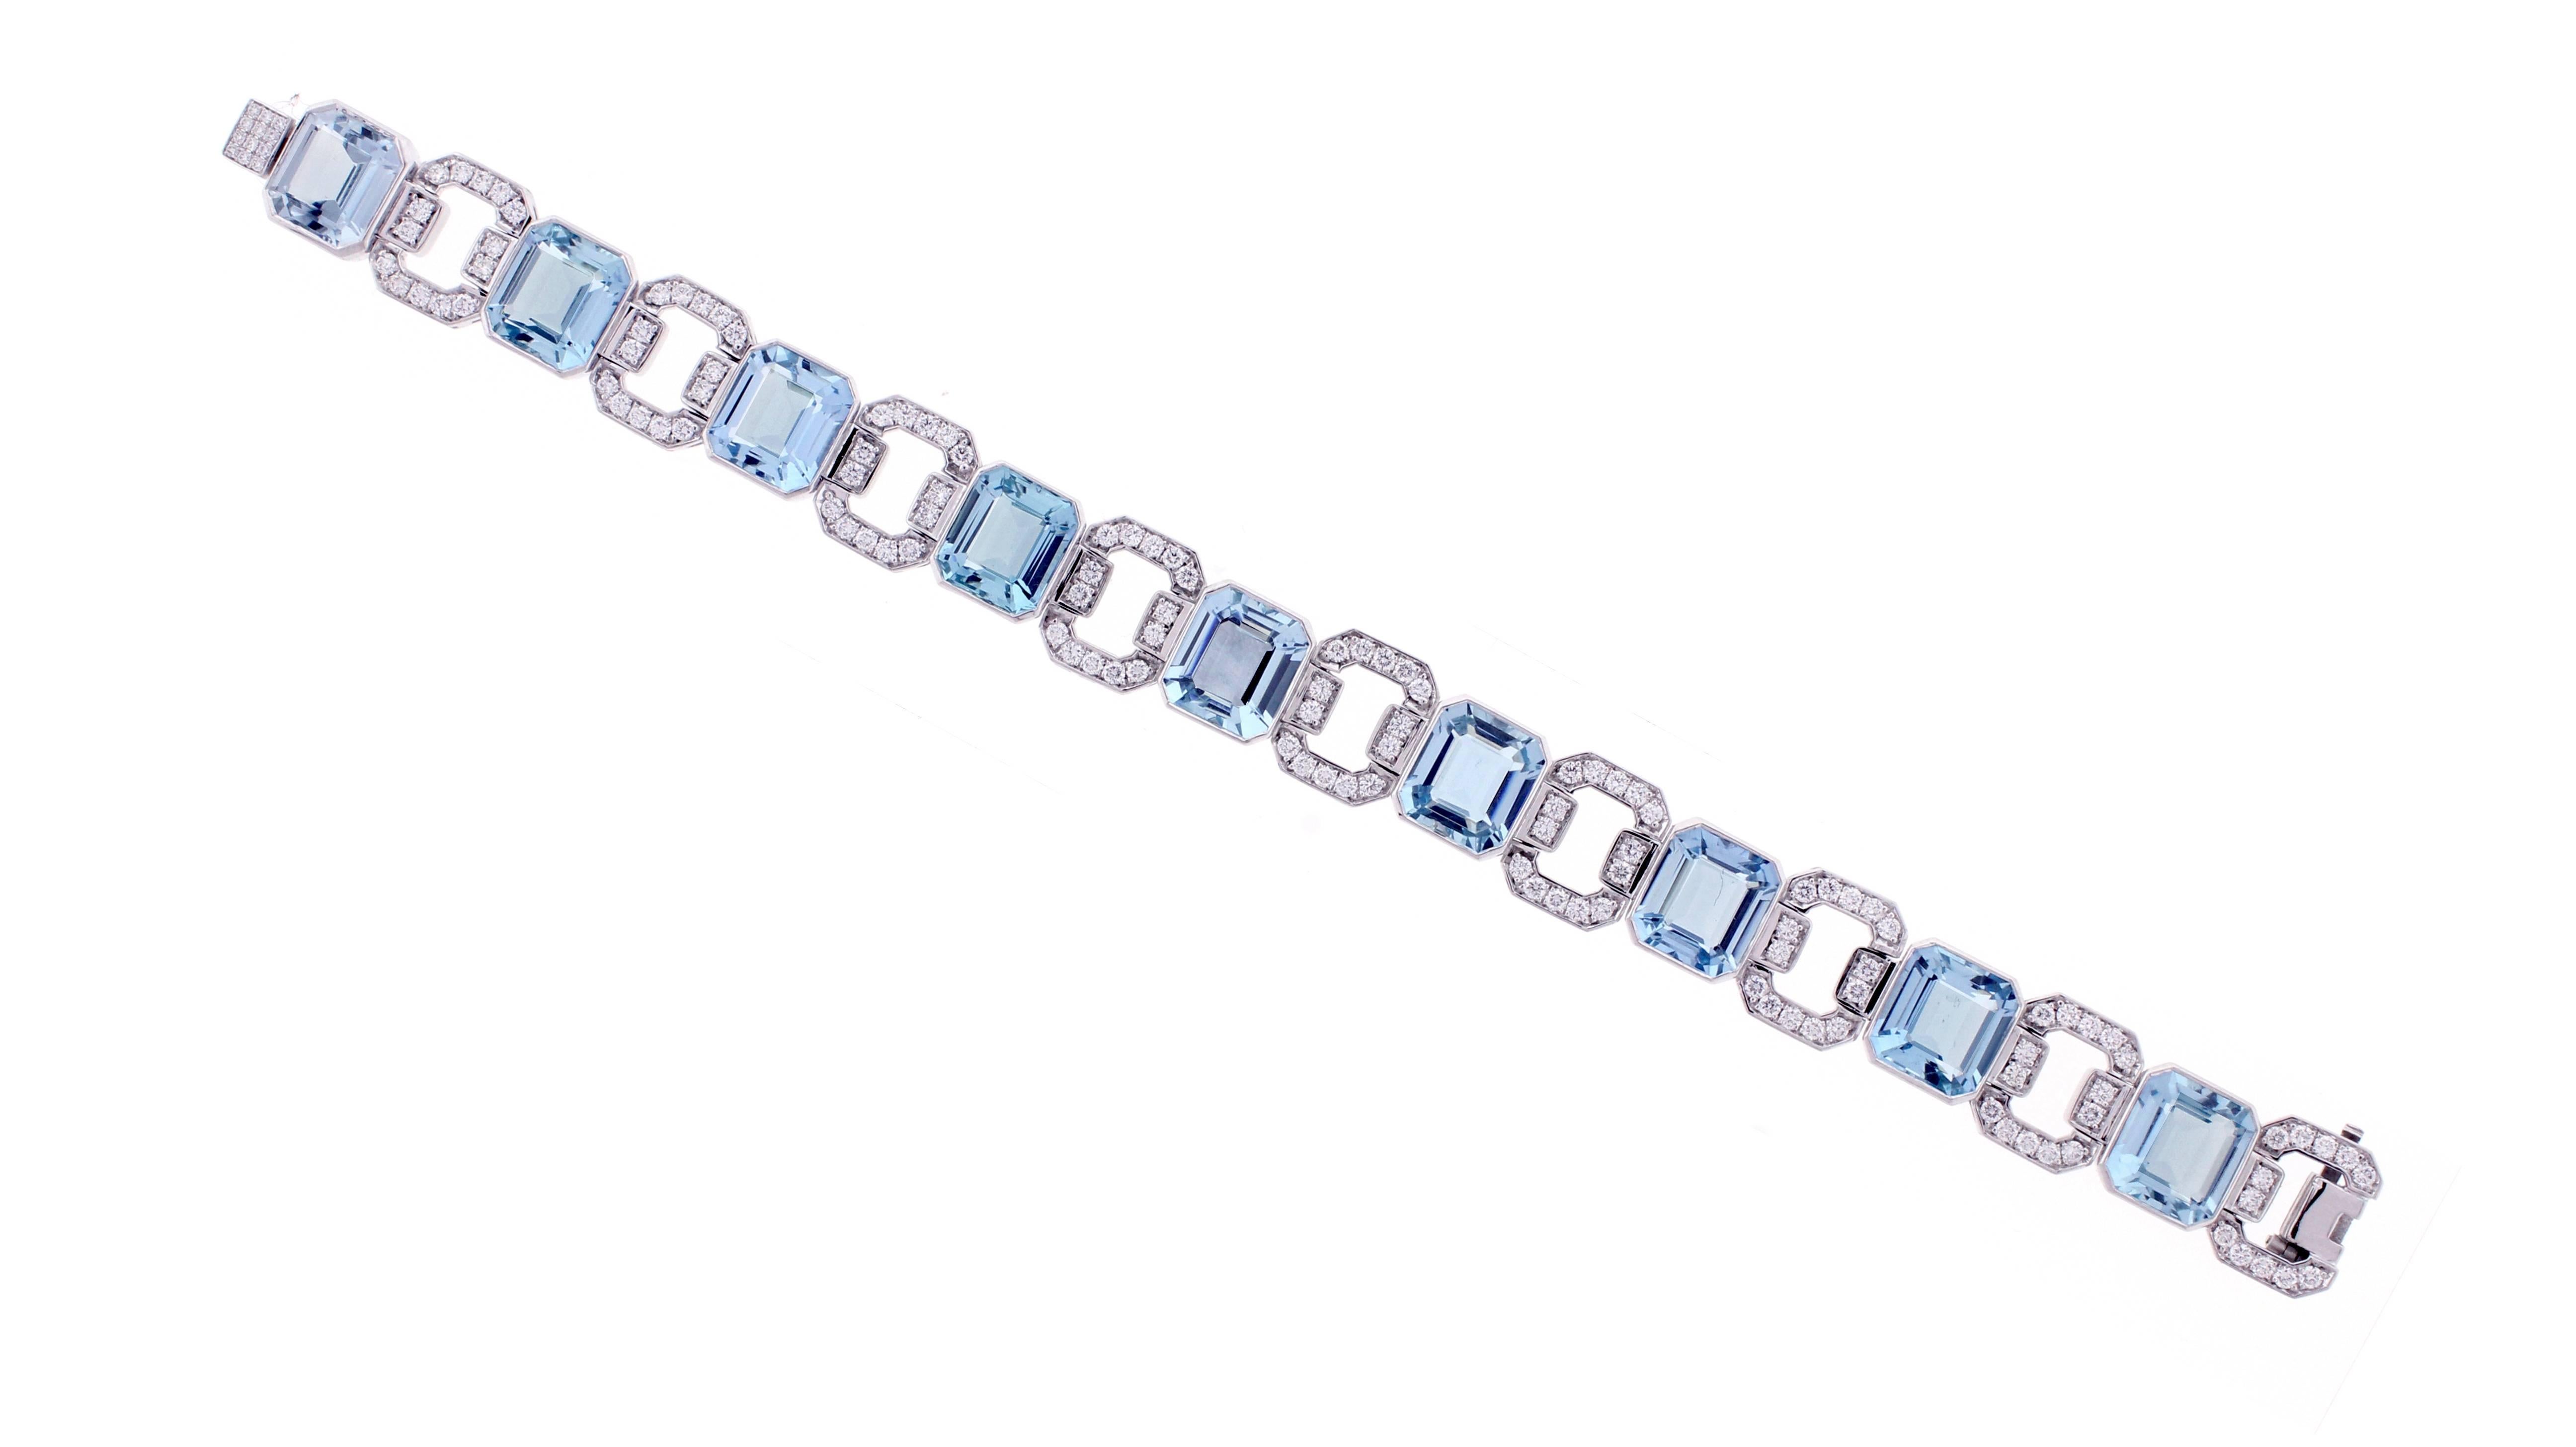 From the master jewelers of Pampillonia, this magnificent aquamarine  and diamond bracelet.  With precise attention to detail and flawless workmanship this  bracelet boasts 9 emerald cut aquamarines weighing 28.10 carats and 136 brilliant diamonds